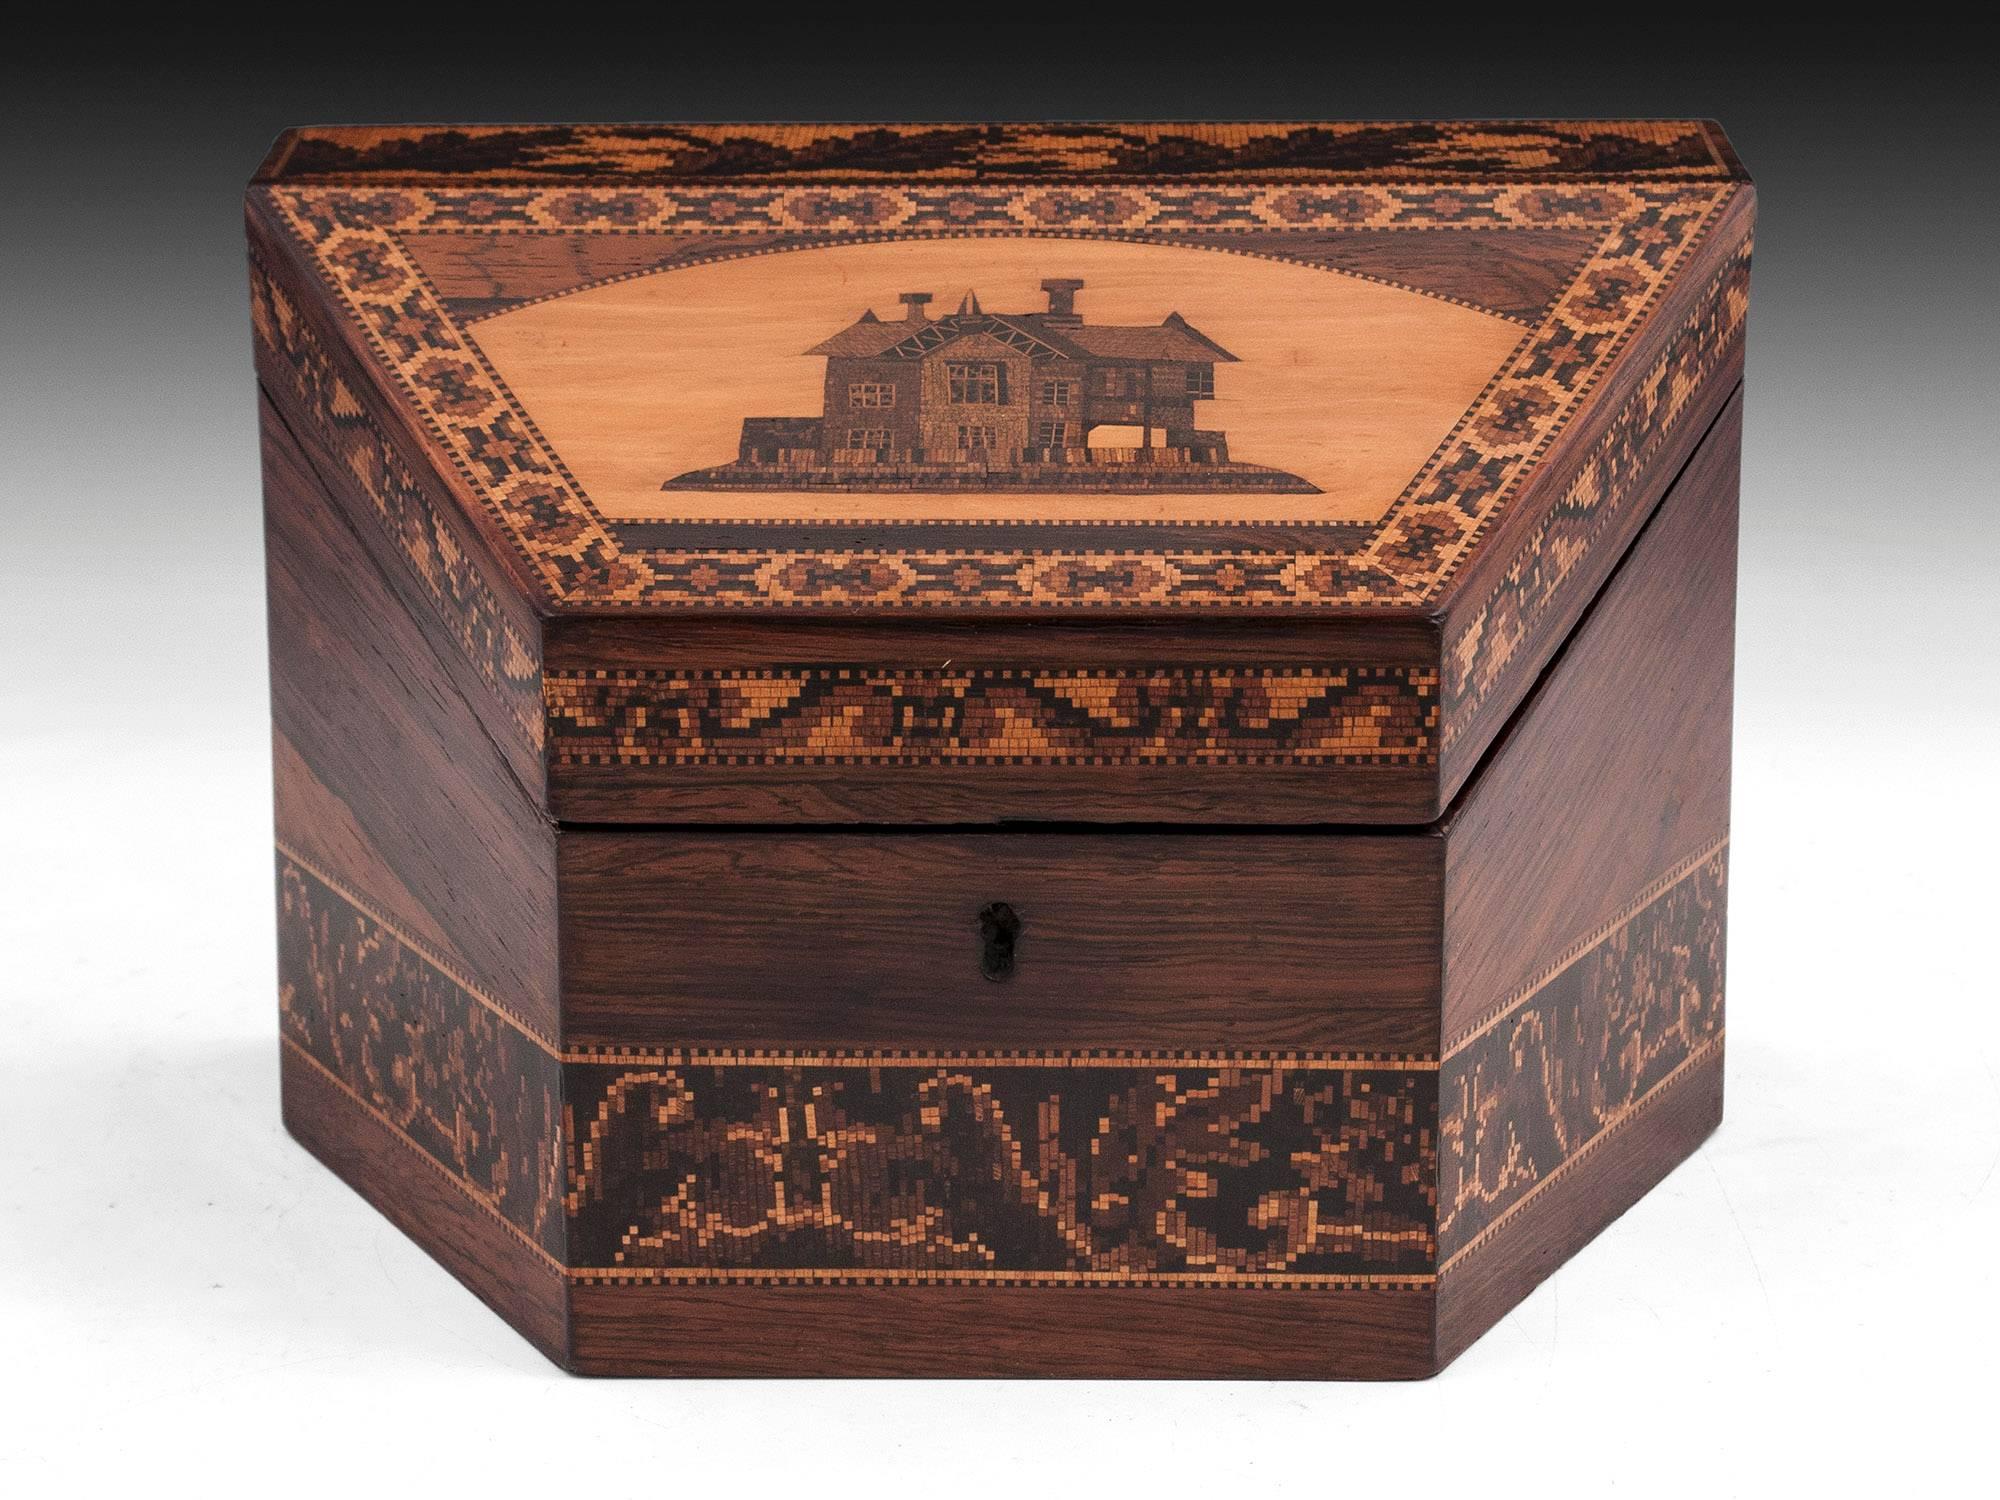 Tunbridge ware stationery box veneered in flame mahogany with an unusual Topographical Cottage design on the lid surrounded with floral bands. 
The interior of the antique Tunbridge ware box is lined with original pink and gold star patterned paper